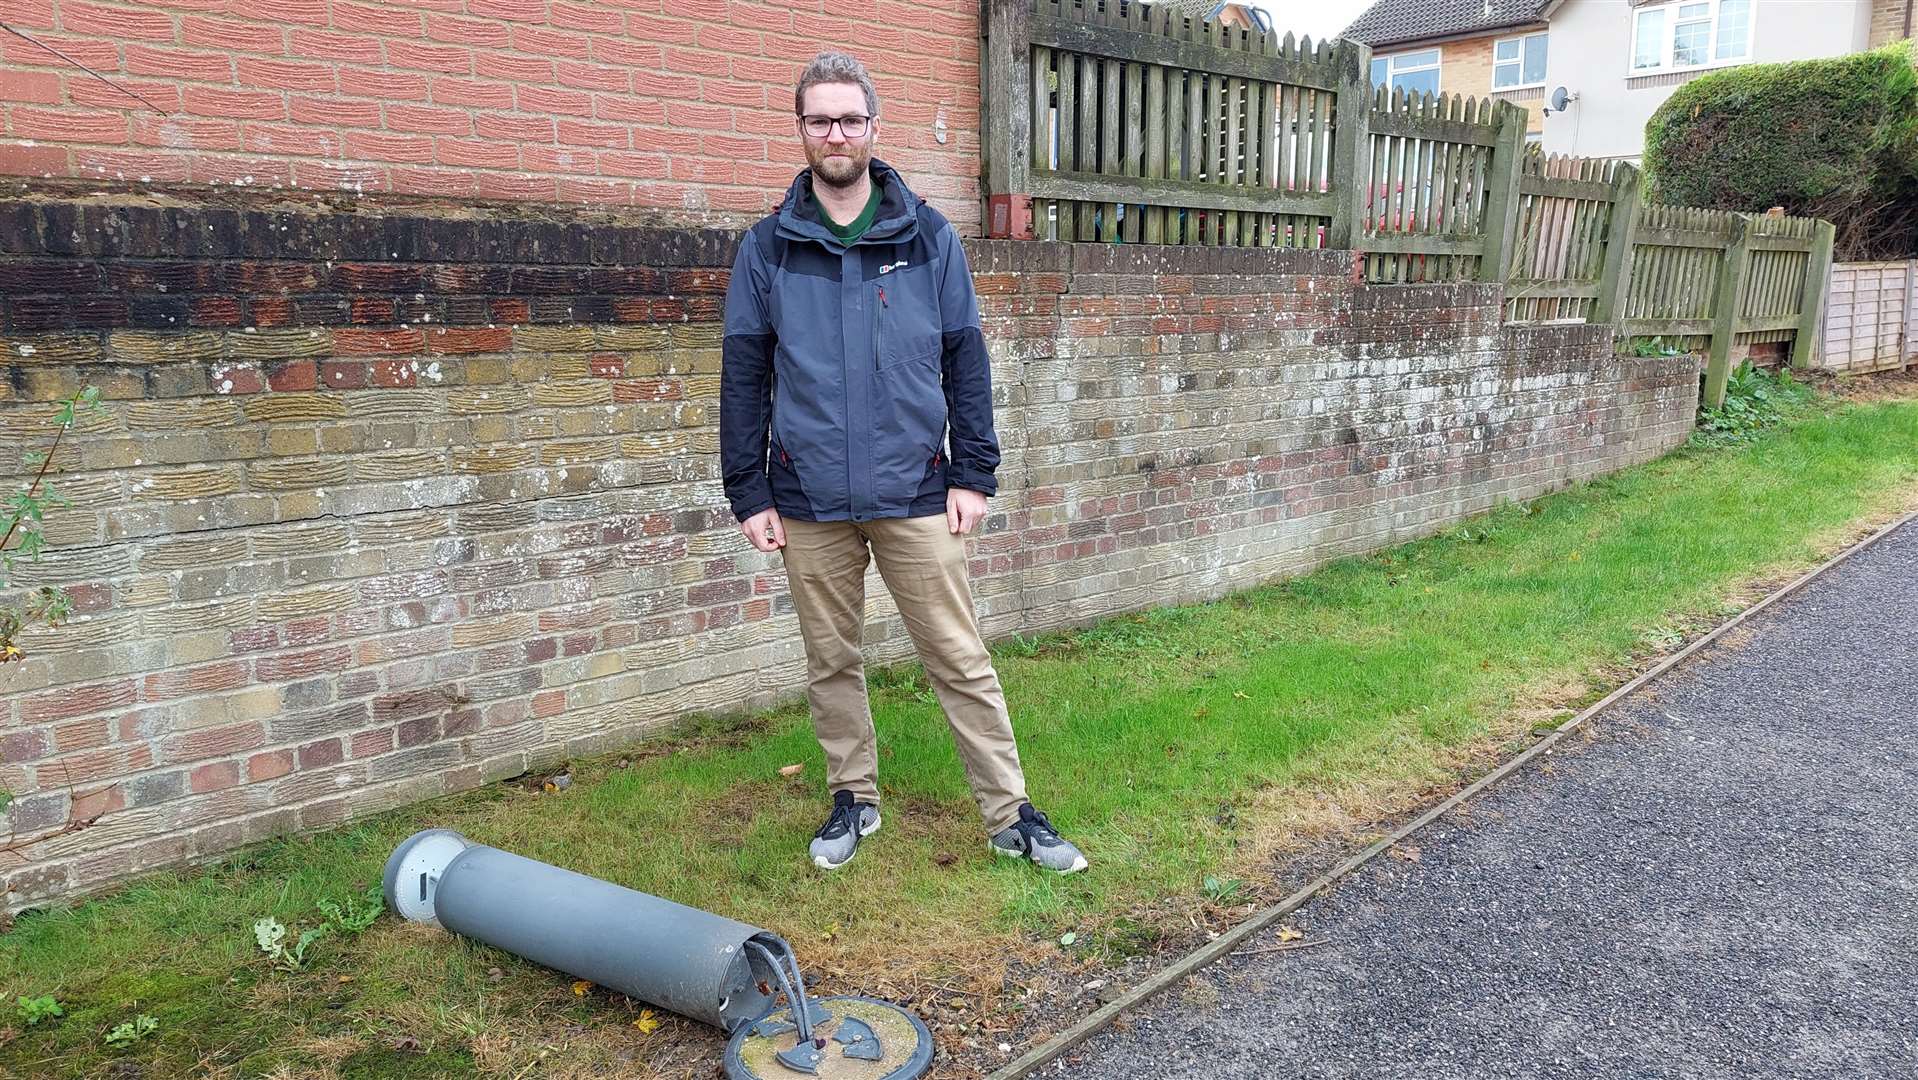 Cllr Jamie Pout would like to see the posts replaced with taller and stronger street lights